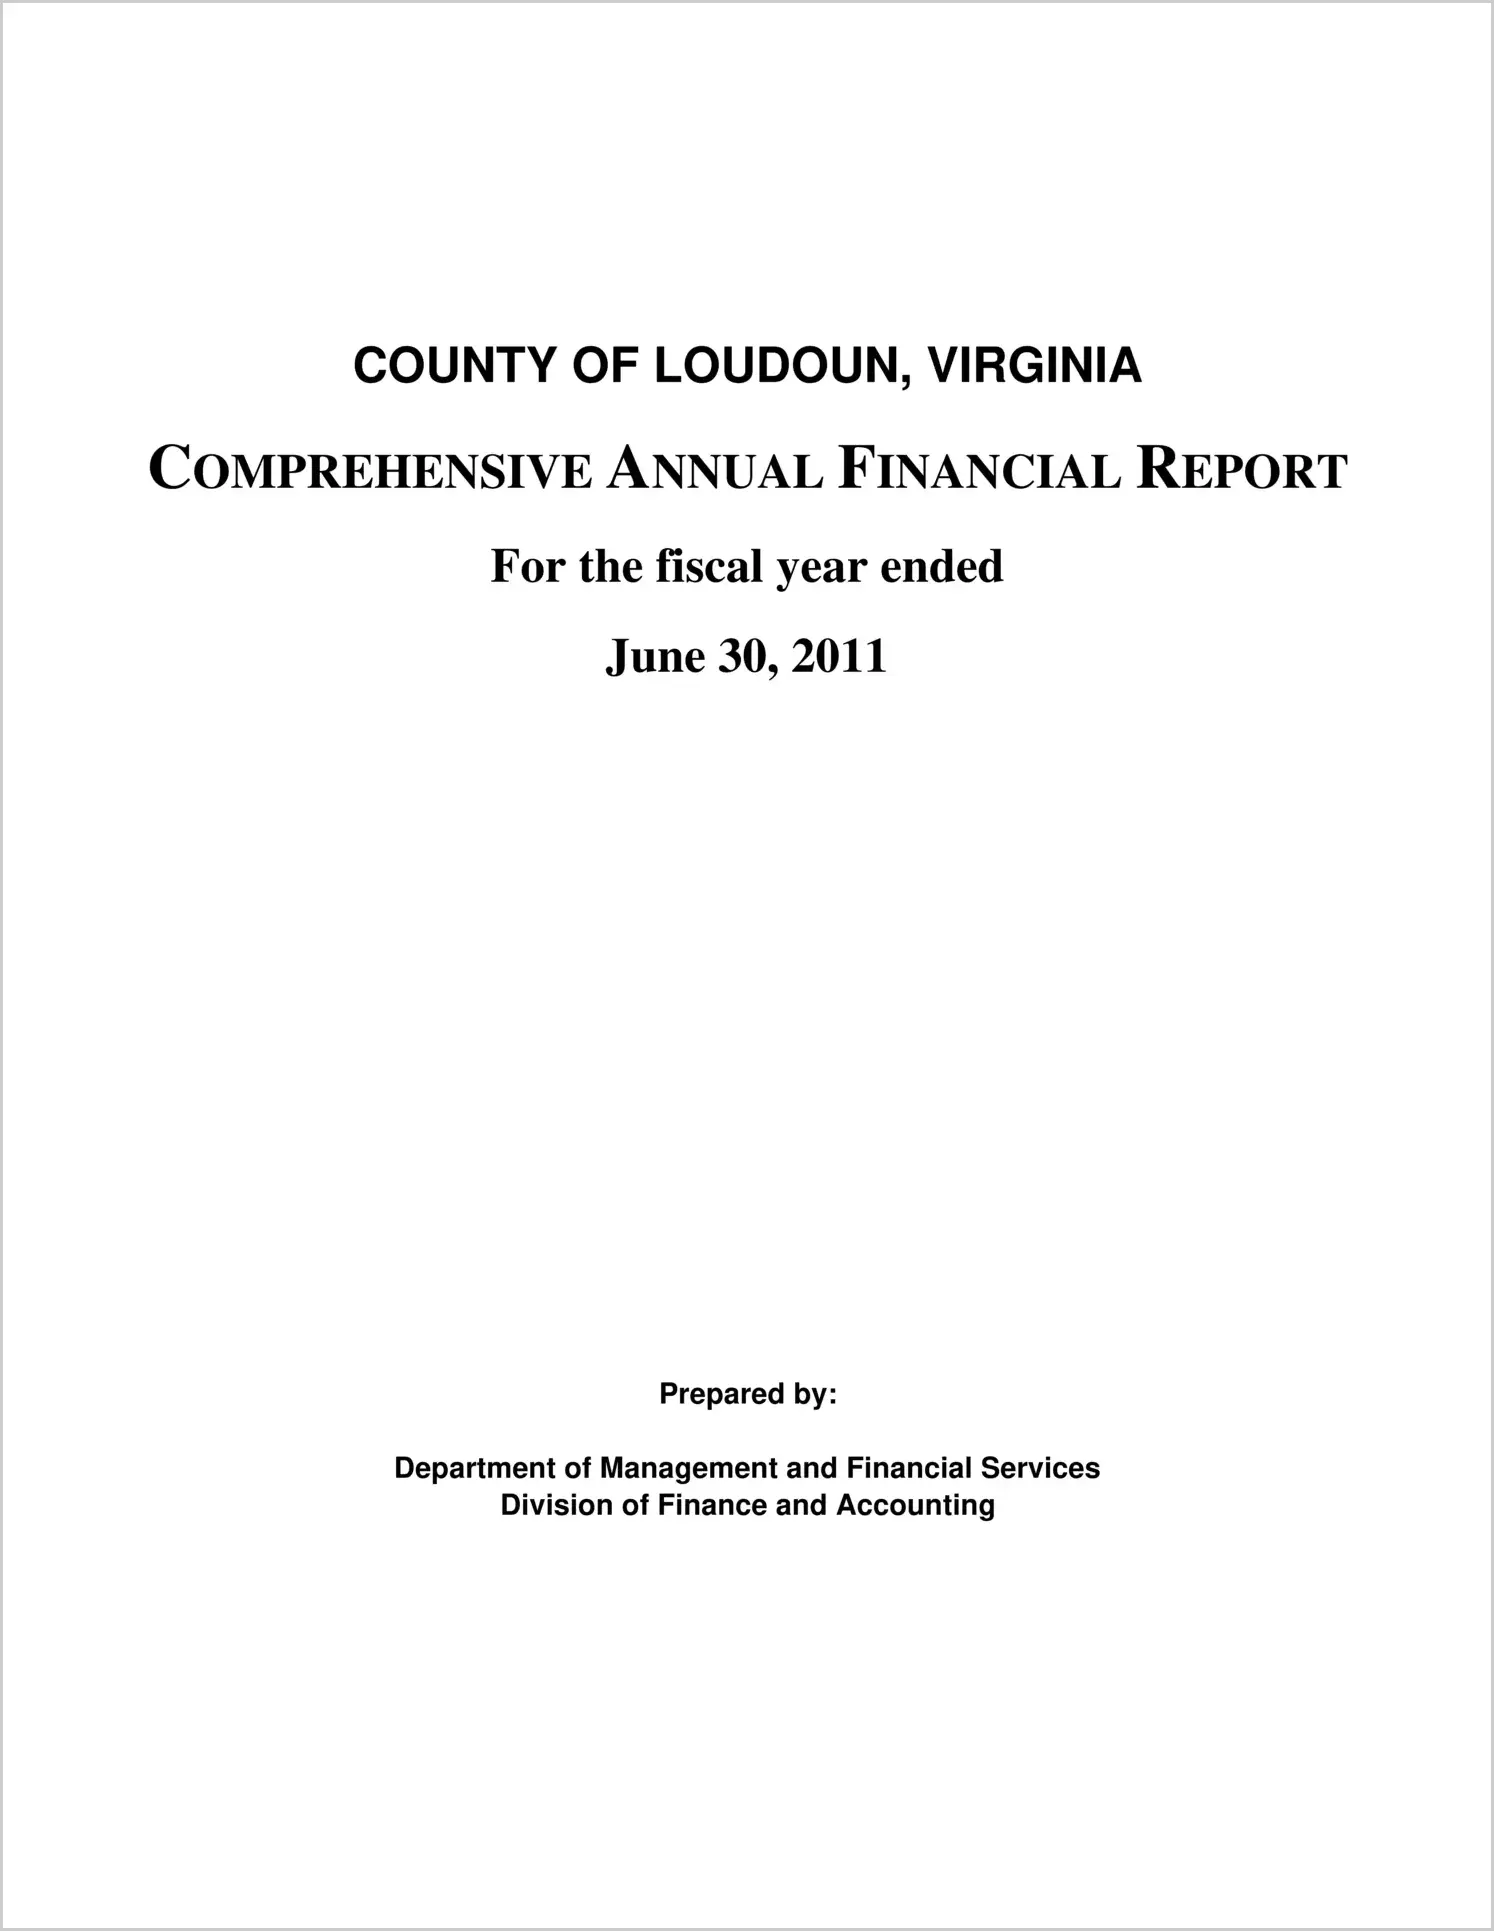 2011 Annual Financial Report for County of Loudoun